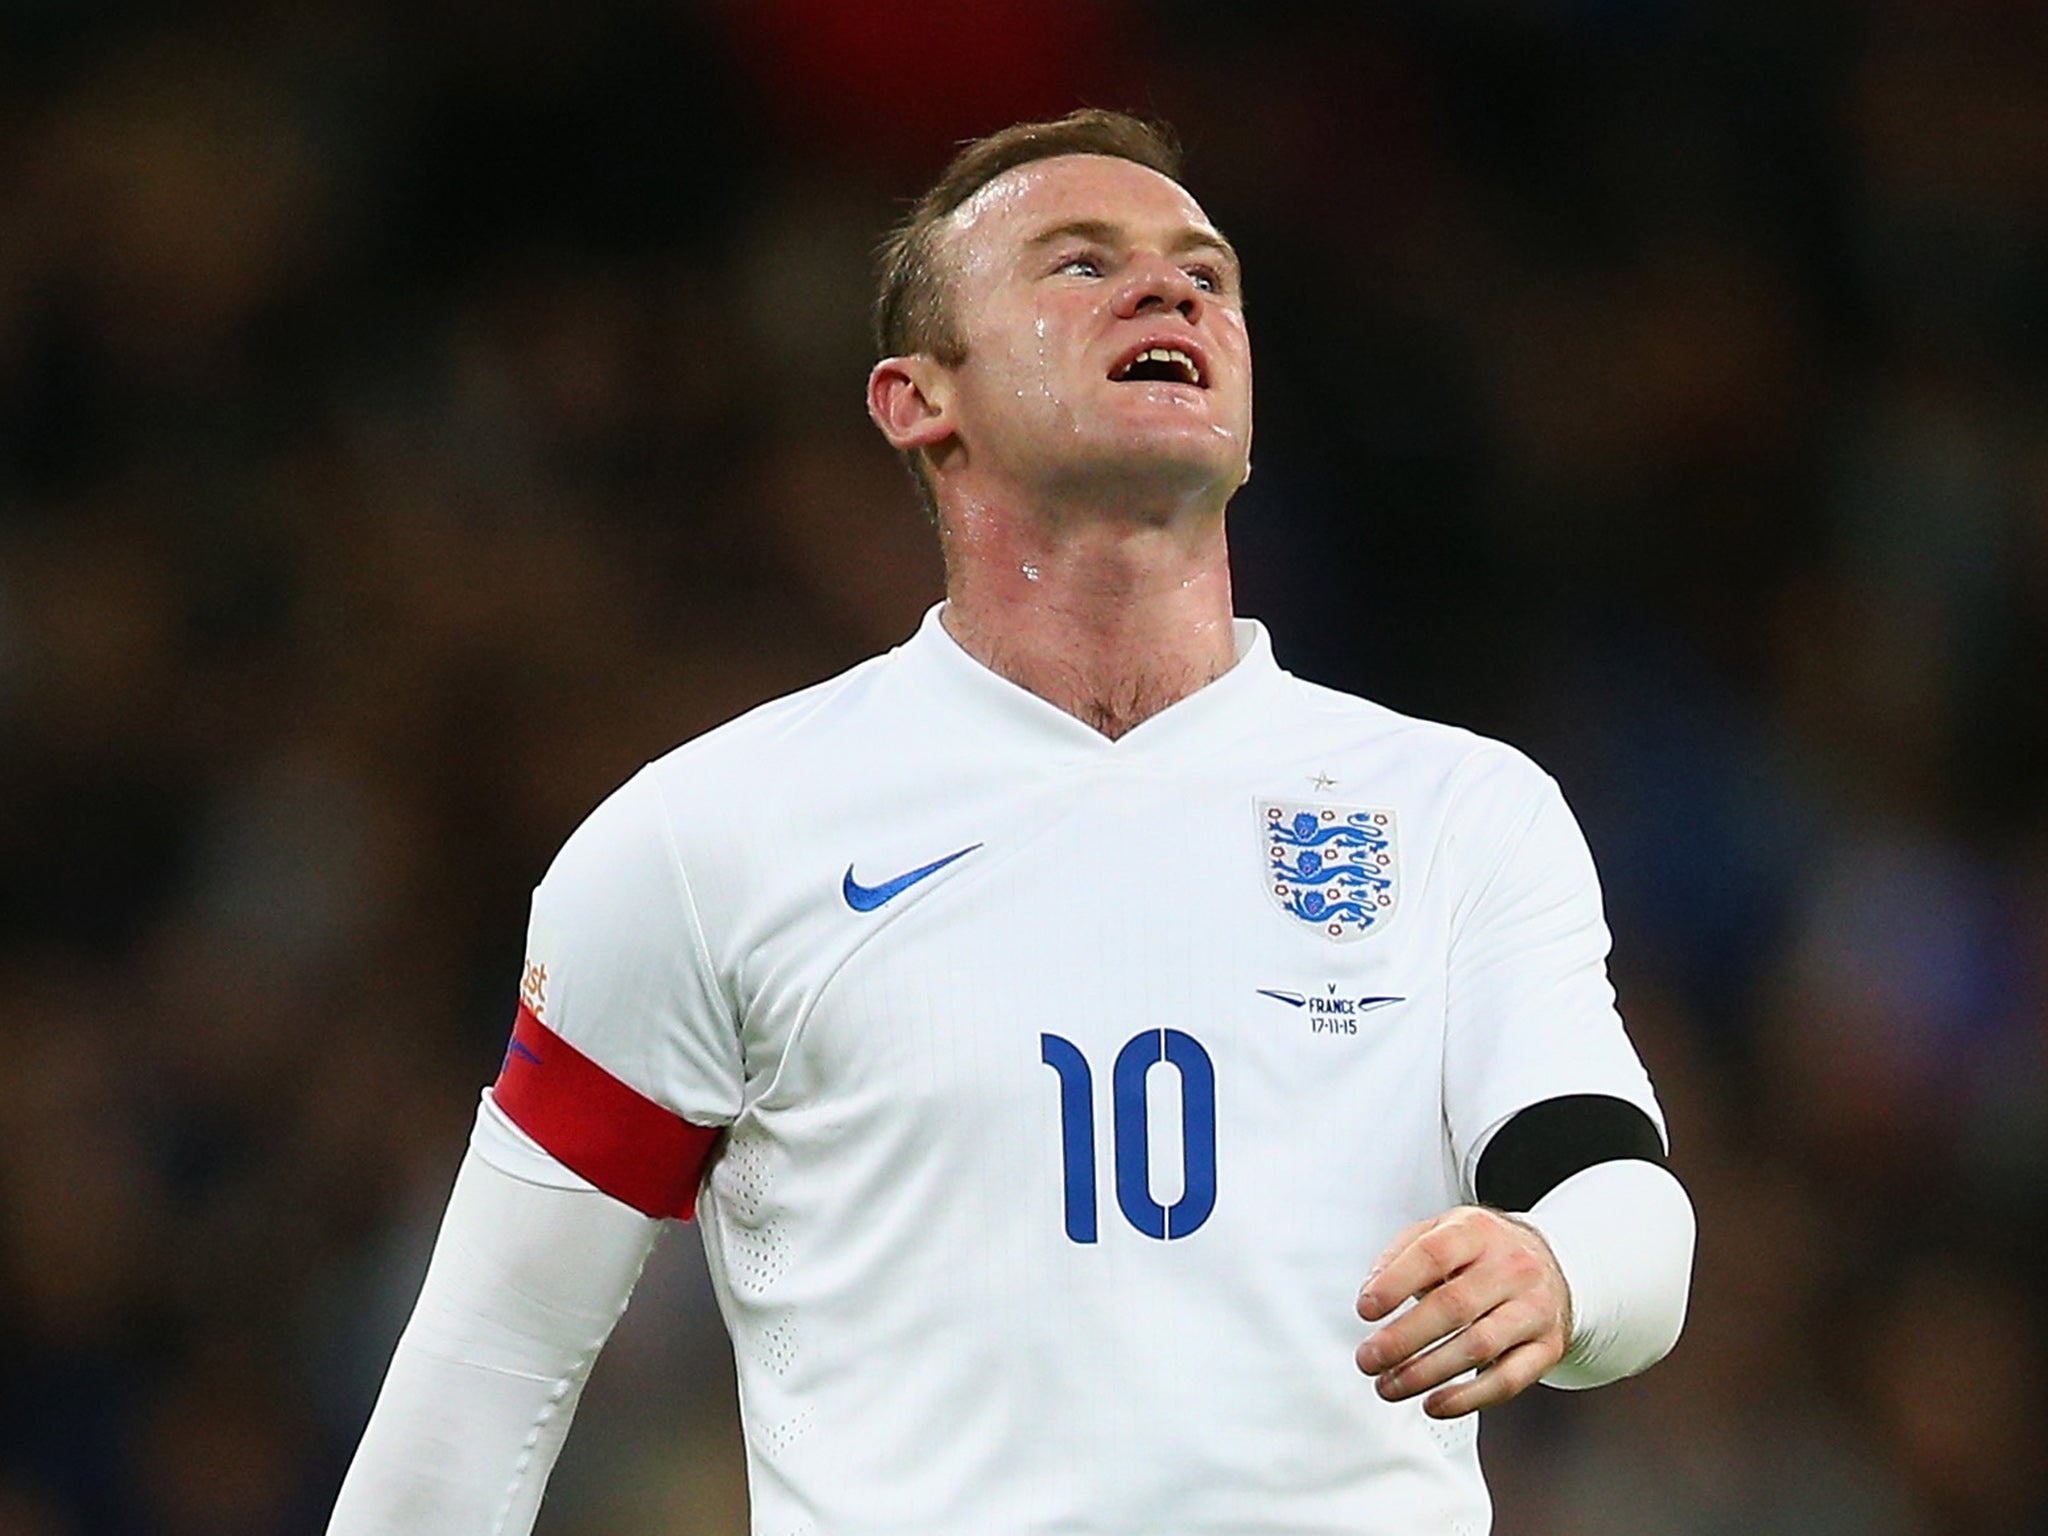 Rooney went on to captain the Three Lions